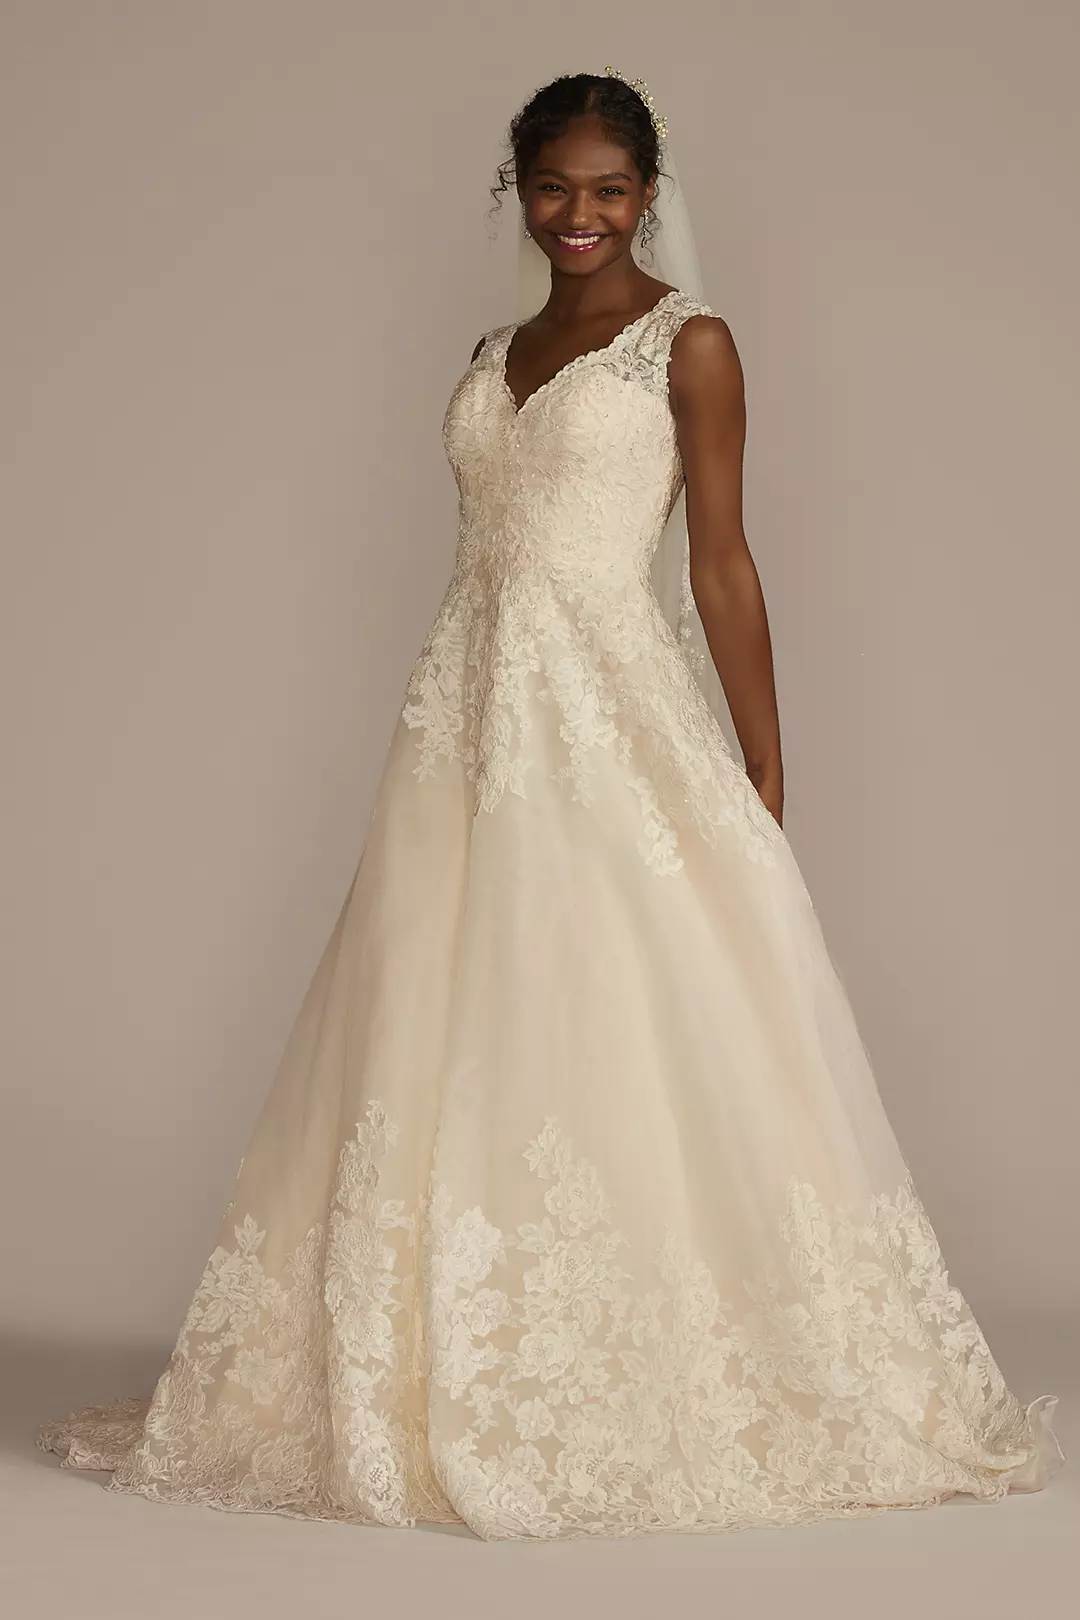 Scalloped Lace and Tulle Wedding Dress Image